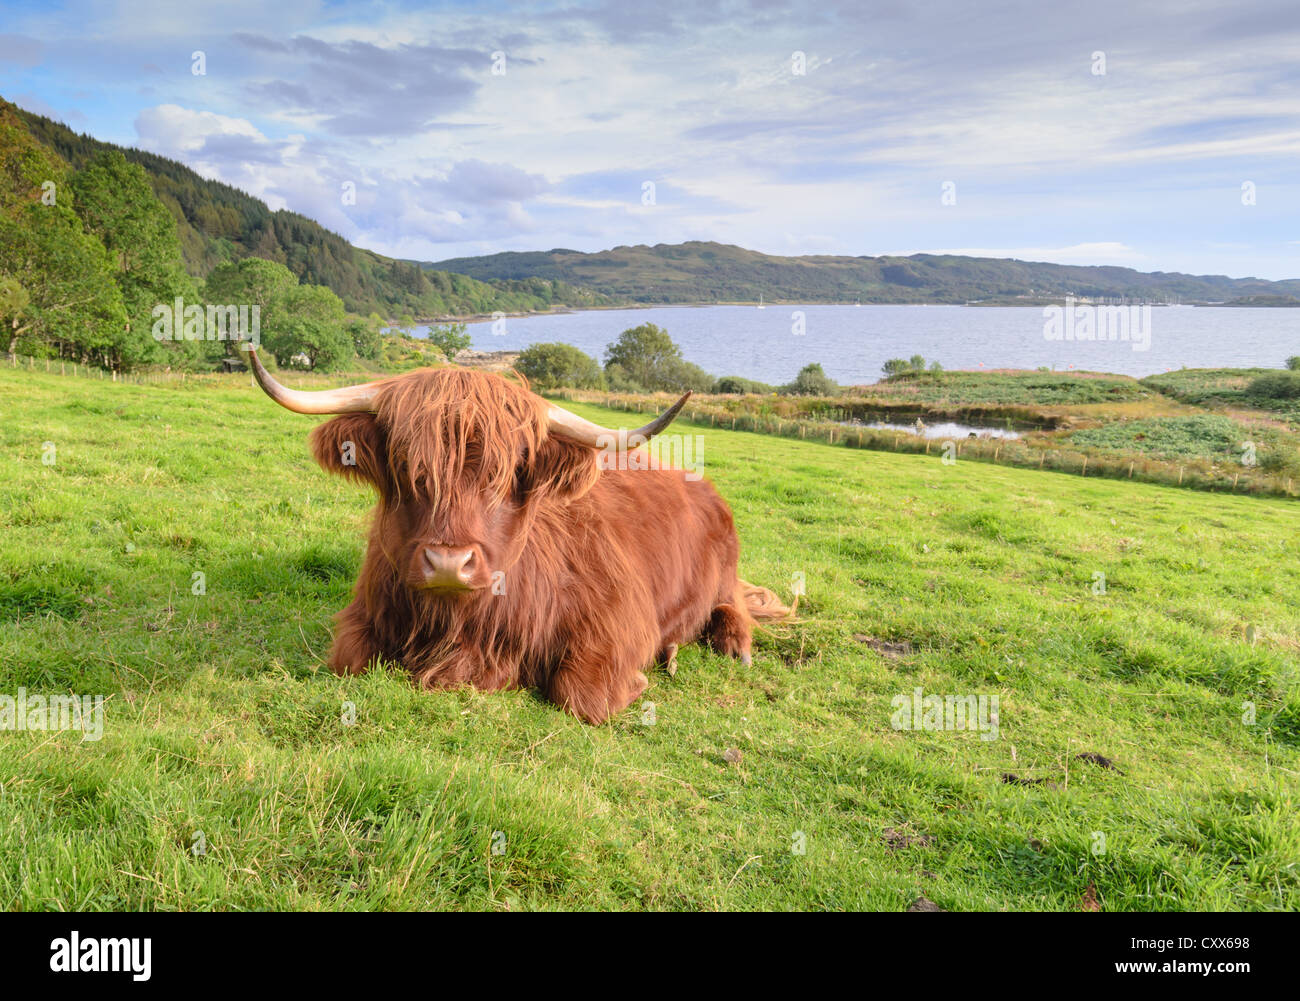 A resting red highland cow Stock Photo